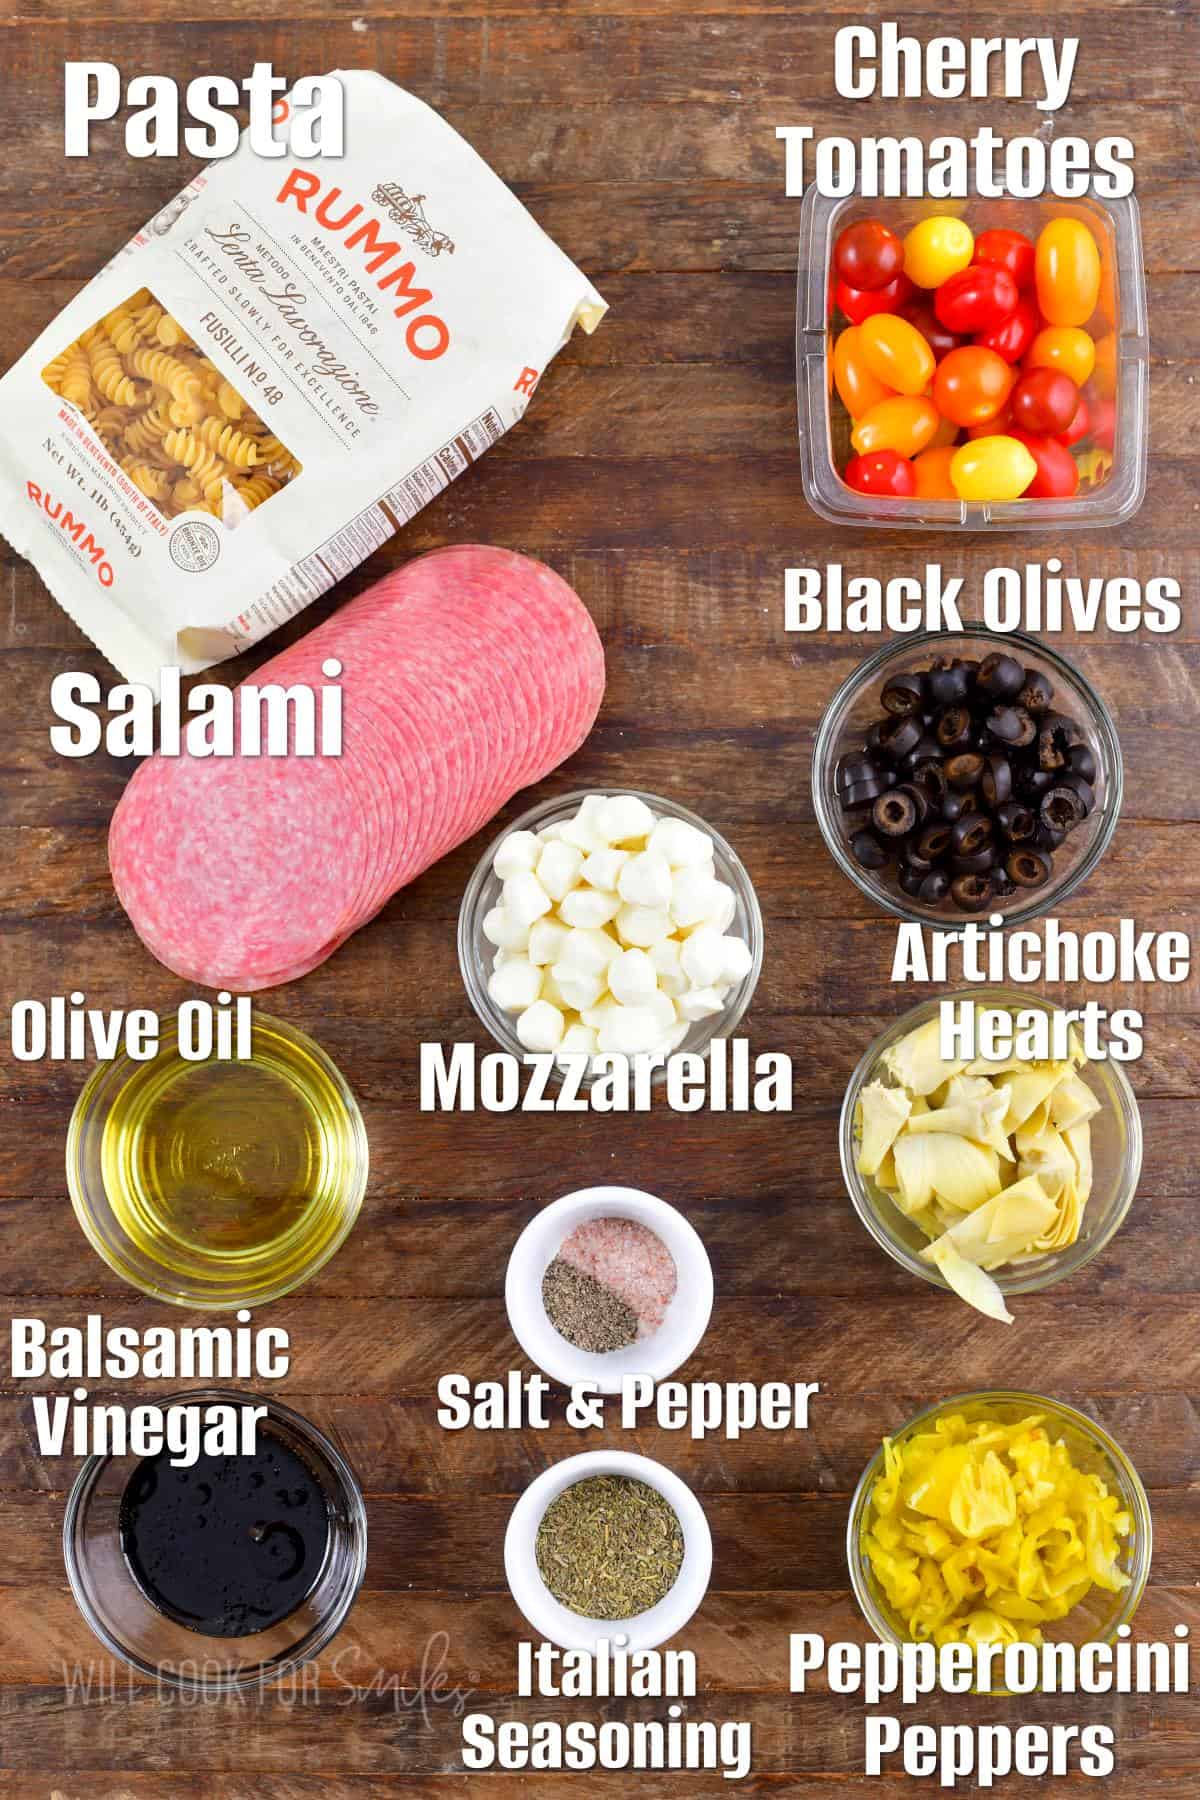 labeled ingredients for antipasto pasta salad on the wooden background.